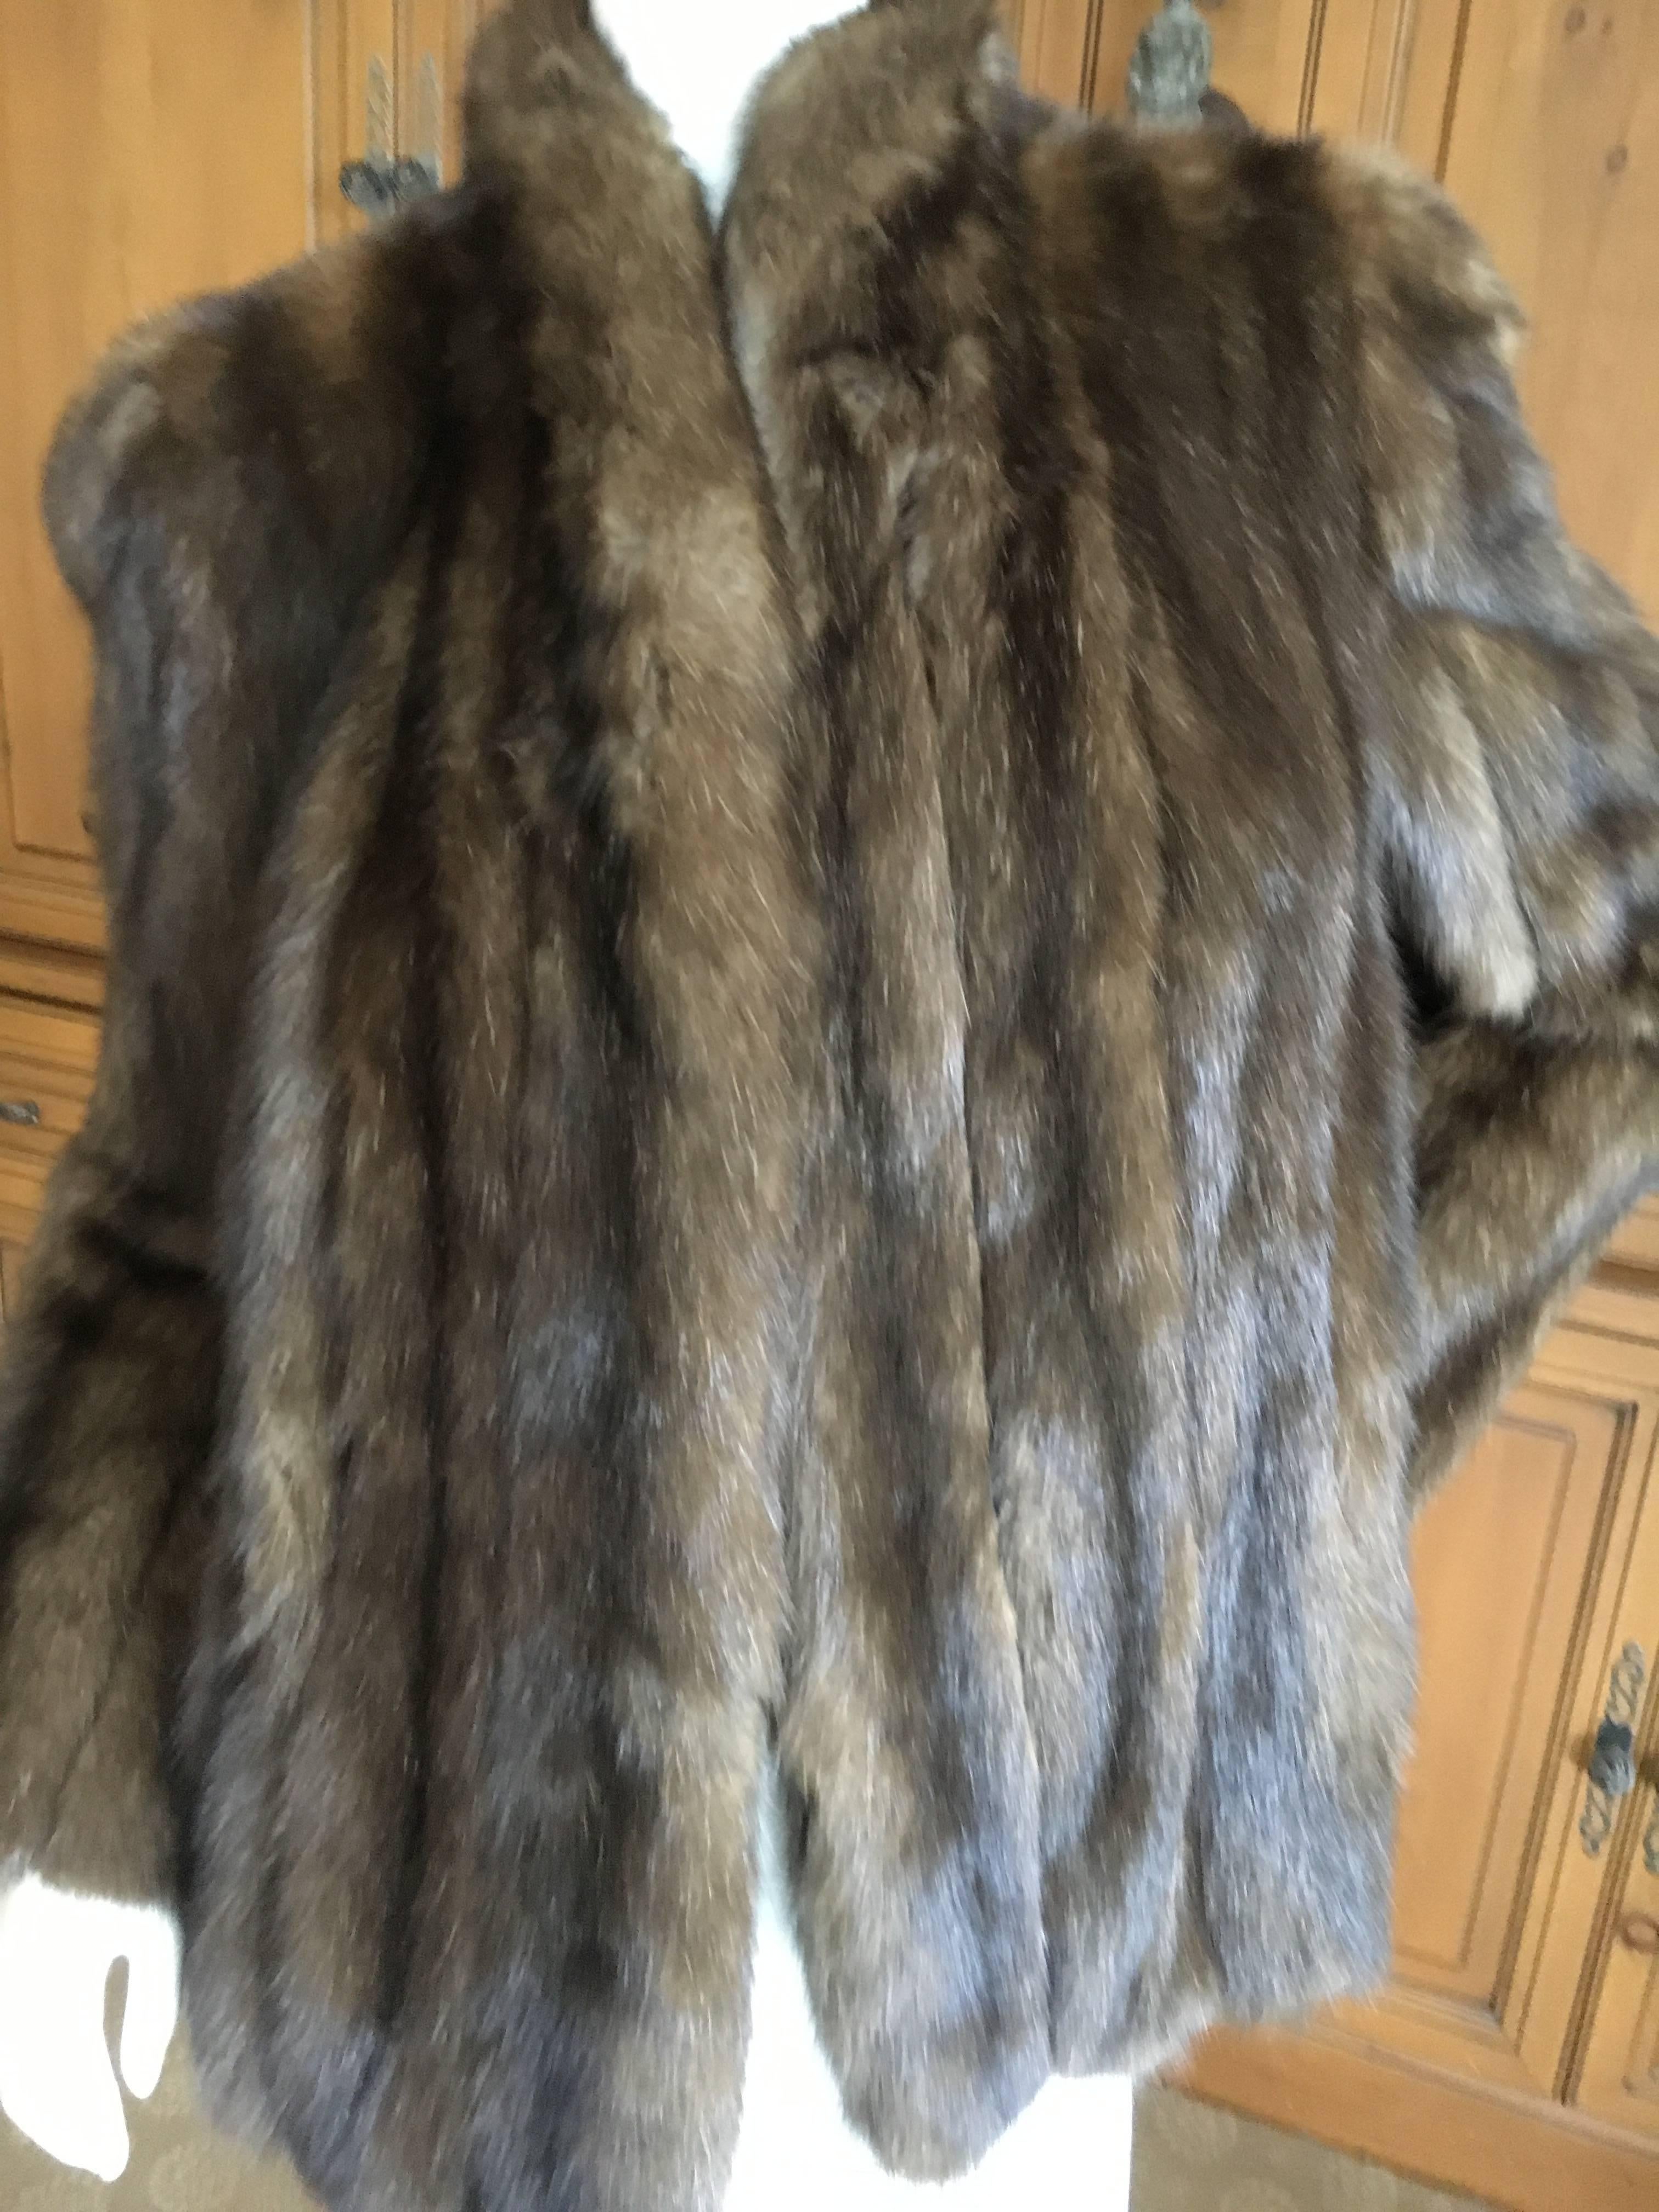 Imperial Barguzine Russian Sable Jacket In Excellent Condition For Sale In Cloverdale, CA